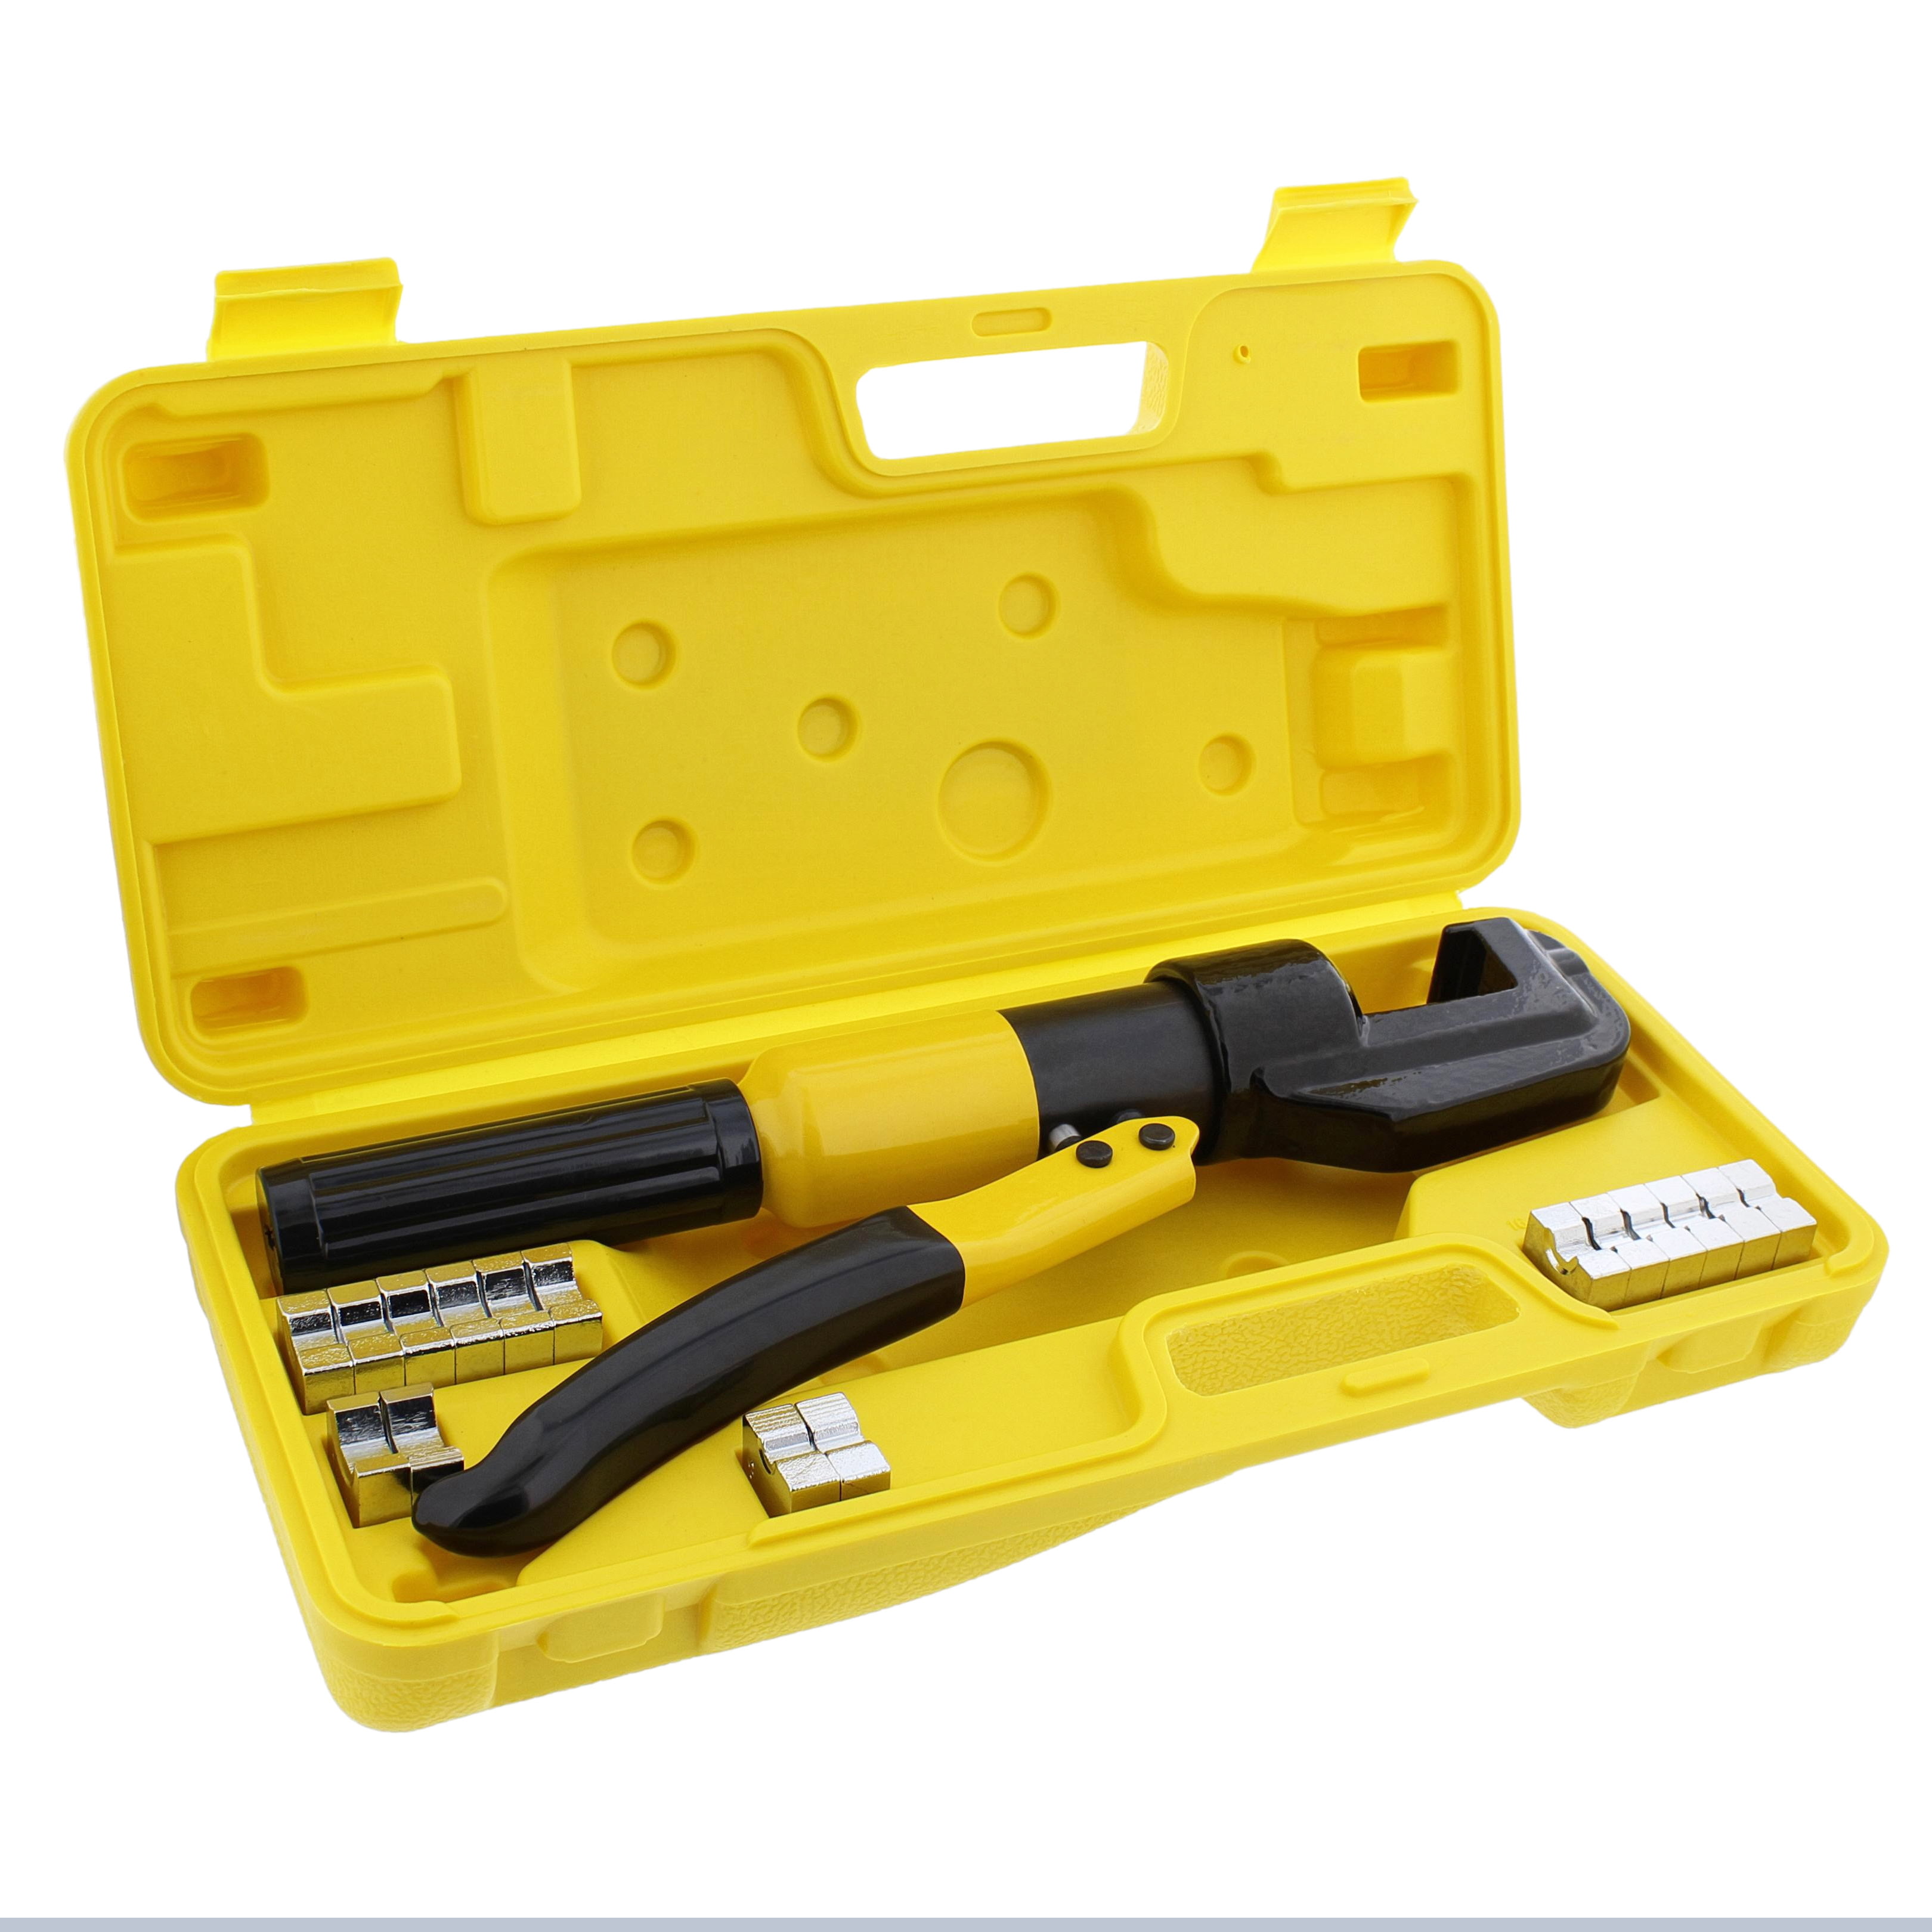 Goplus 16 Ton Hydraulic Wire Crimper Battery Cable Lug Terminal Crimping Tool w/ 